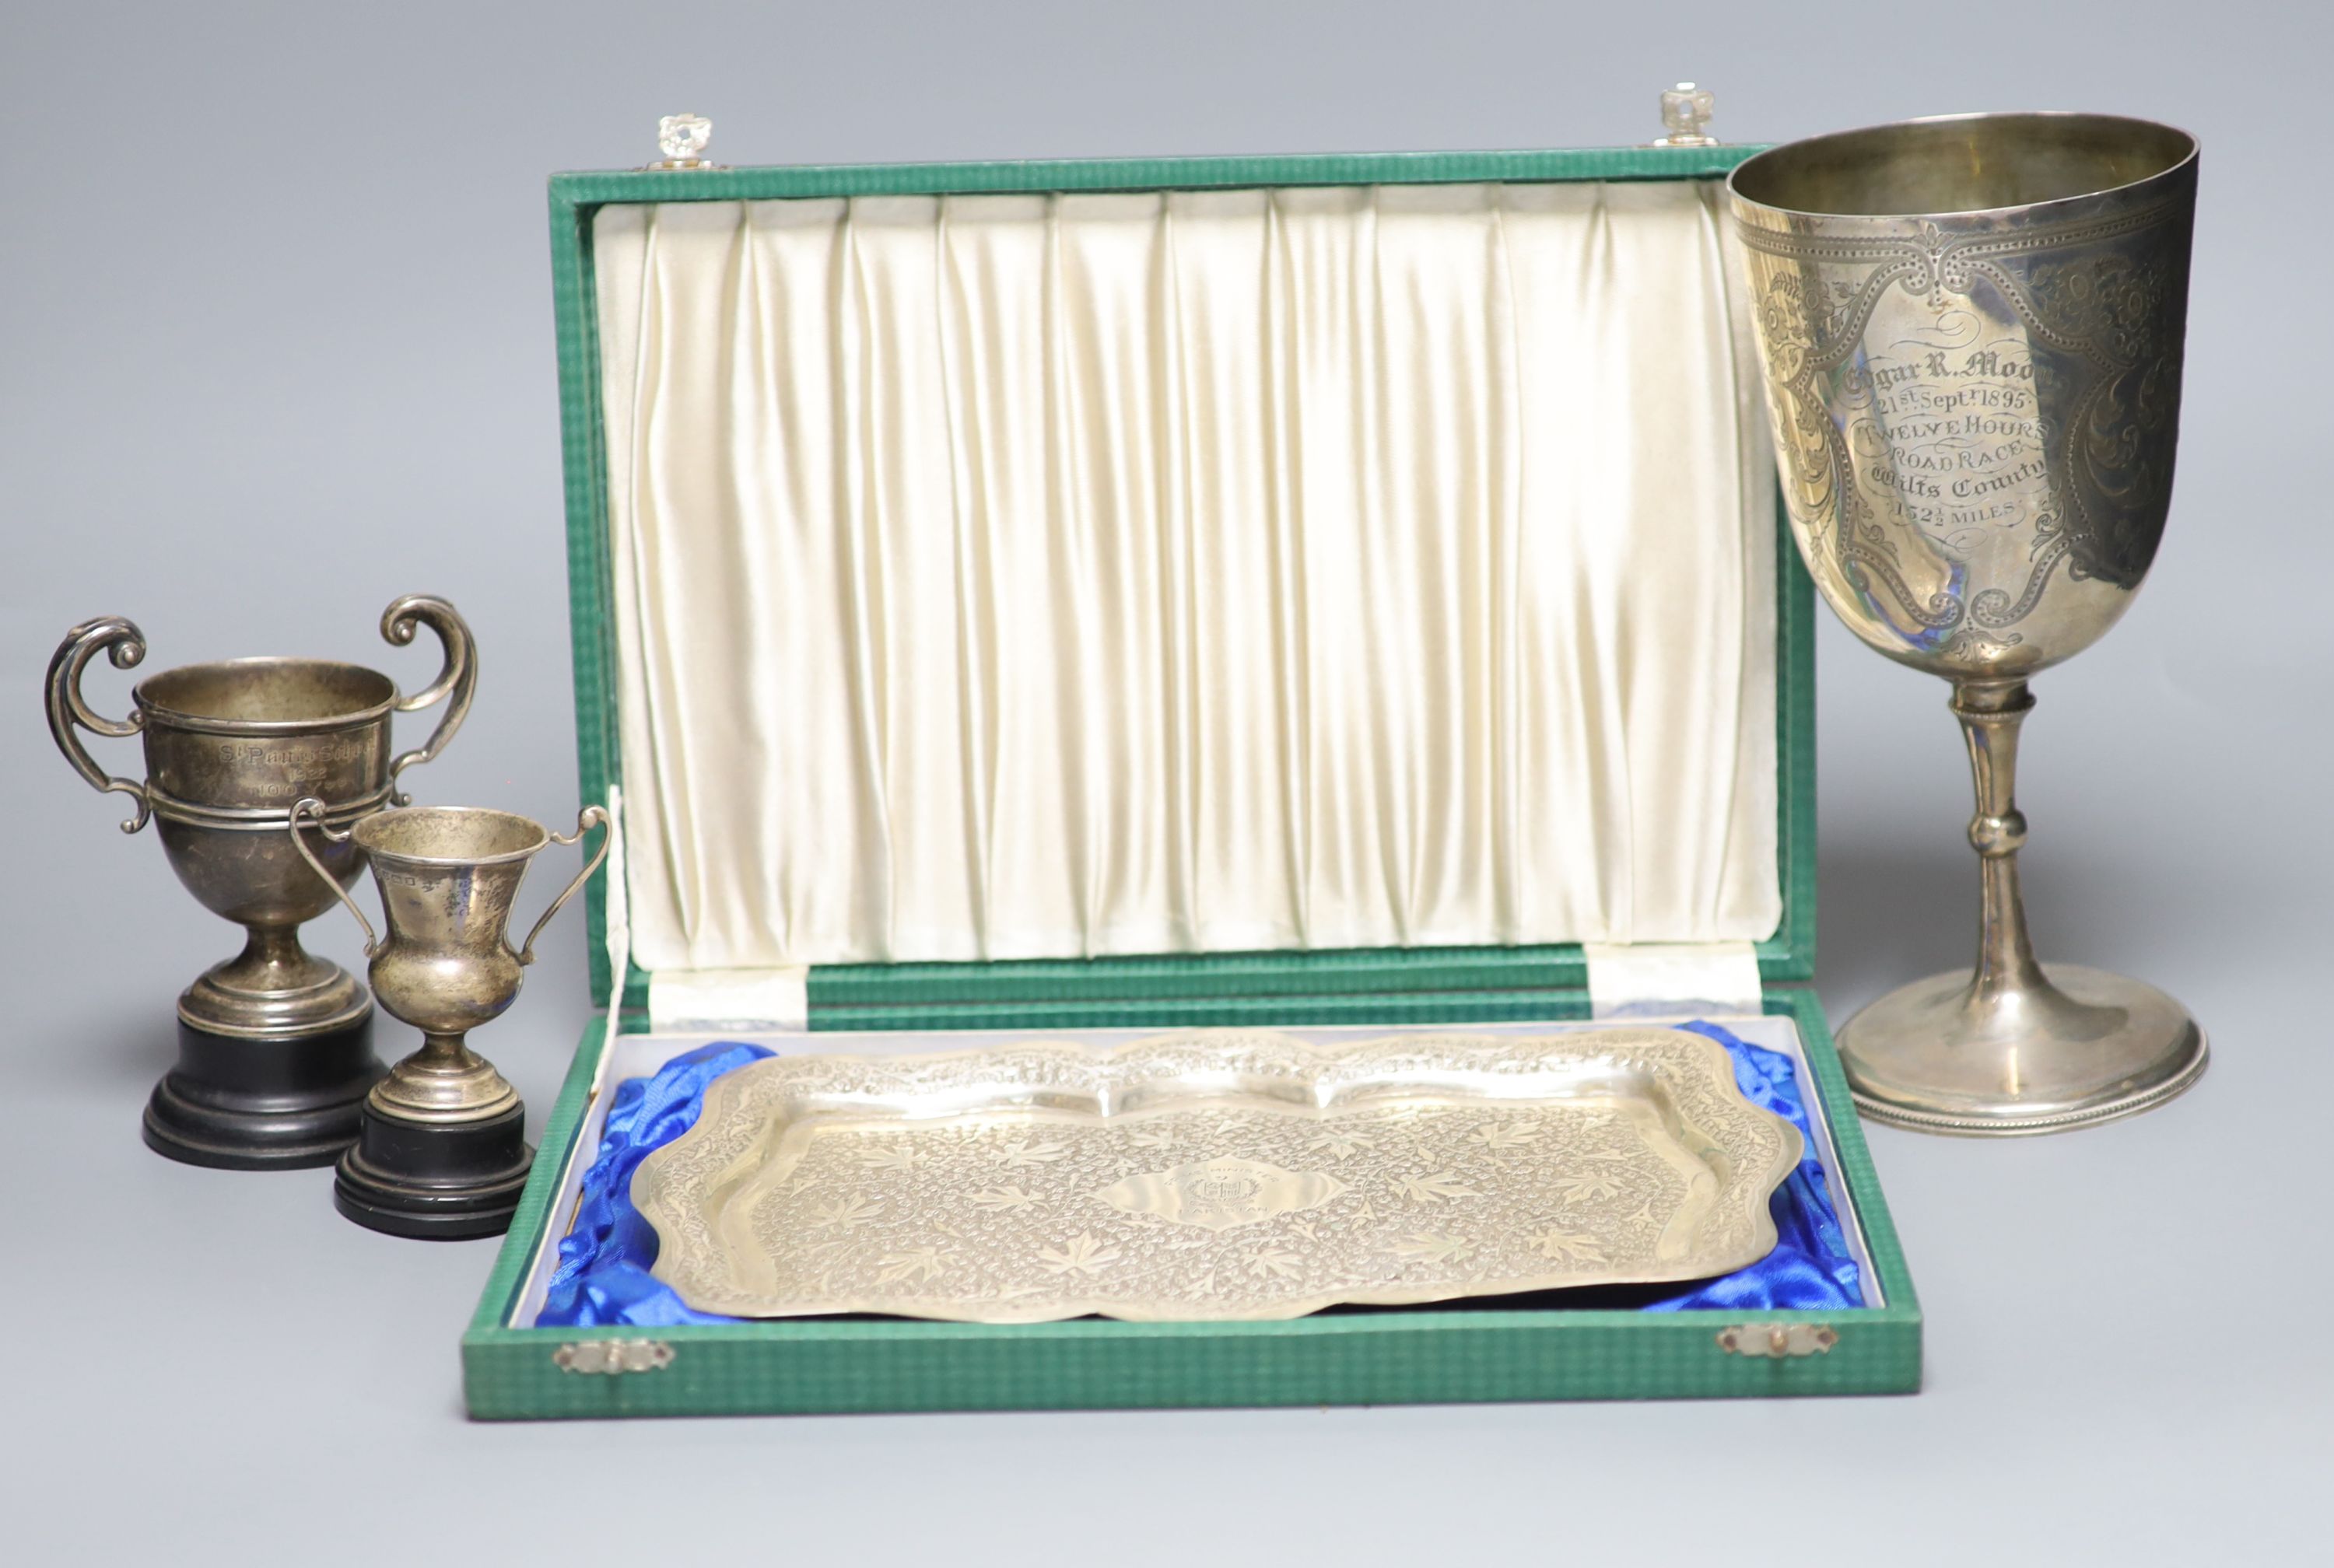 A Victorian engraved silver trophy cup, 'Twelve Hours Road Race', 1895, two small silver trophy cups and an embossed white metal presentation tray